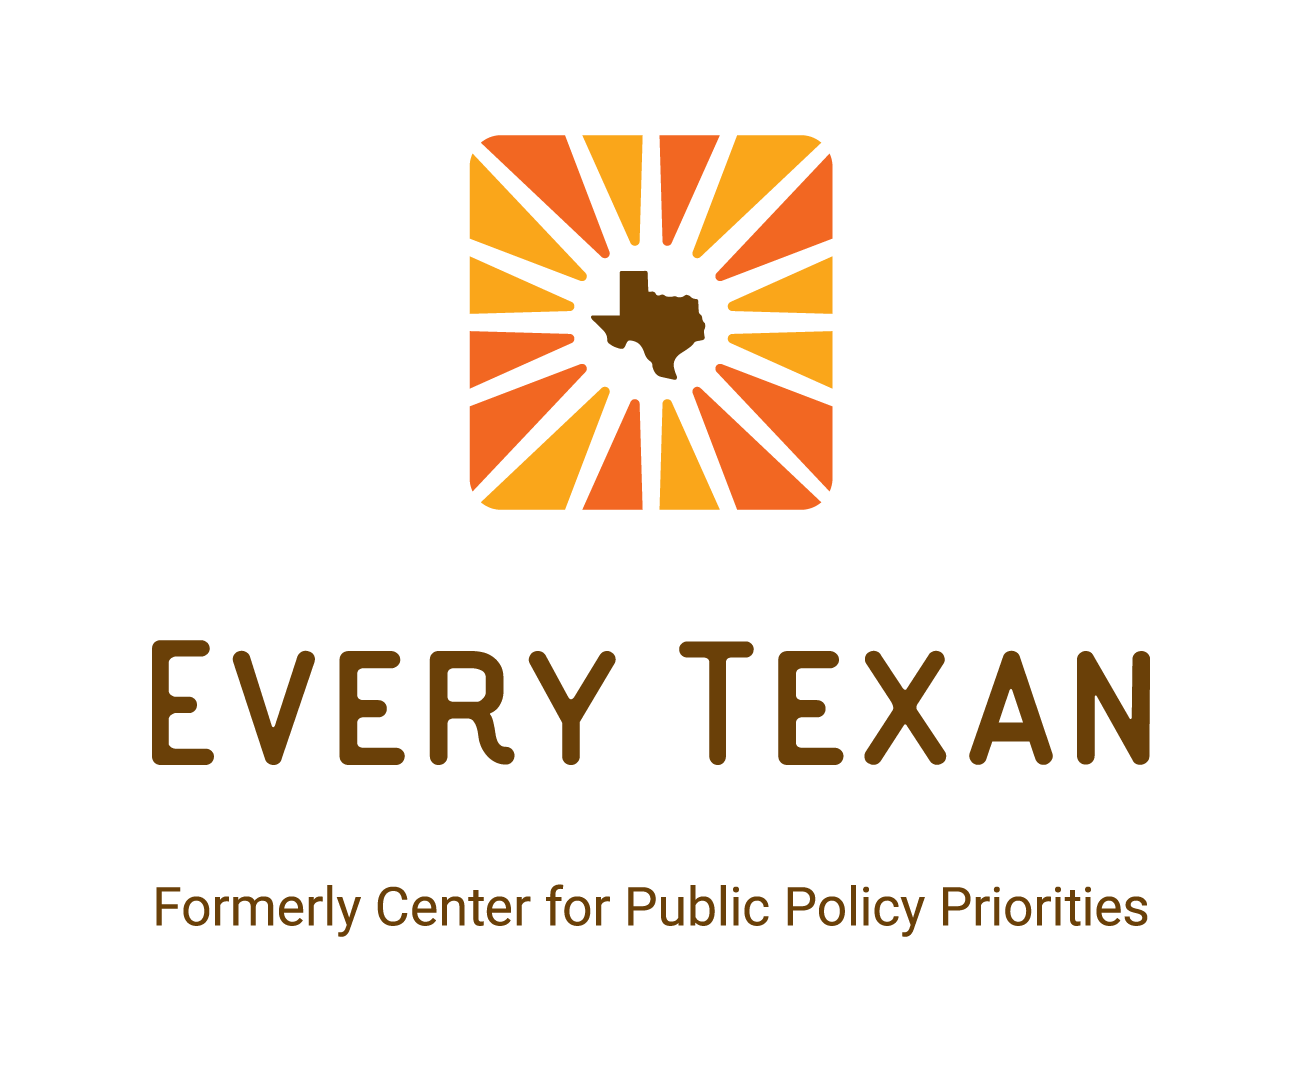 Every Texan, formerly Center for Public Policy Priorities